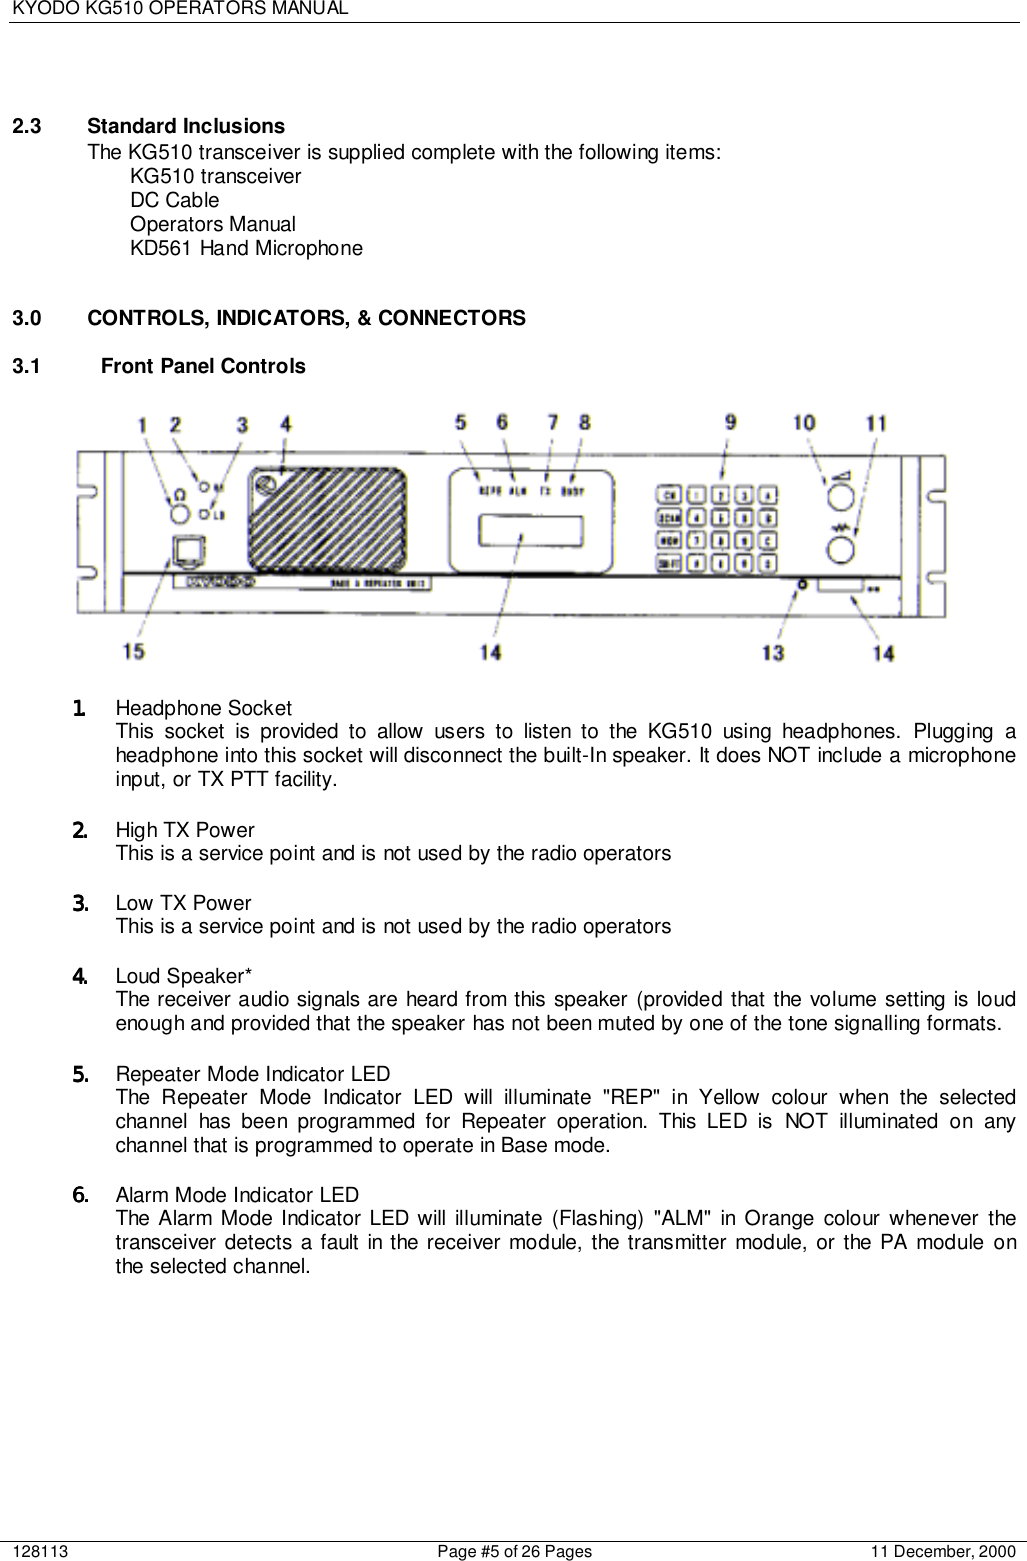 KYODO KG510 OPERATORS MANUAL128113 Page #5 of 26 Pages 11 December, 20002.3 Standard InclusionsThe KG510 transceiver is supplied complete with the following items:KG510 transceiverDC CableOperators ManualKD561 Hand Microphone3.0  CONTROLS, INDICATORS, &amp; CONNECTORS3.1  Front Panel Controls 1.1.1.1. Headphone SocketThis socket is provided to allow users to listen to the KG510 using headphones. Plugging aheadphone into this socket will disconnect the built-In speaker. It does NOT include a microphoneinput, or TX PTT facility.2.2.2.2. High TX PowerThis is a service point and is not used by the radio operators3.3.3.3. Low TX PowerThis is a service point and is not used by the radio operators4.4.4.4. Loud Speaker*The receiver audio signals are heard from this speaker (provided that the volume setting is loudenough and provided that the speaker has not been muted by one of the tone signalling formats.5.5.5.5. Repeater Mode Indicator LEDThe Repeater Mode Indicator LED will illuminate &quot;REP&quot; in Yellow colour when the selectedchannel has been programmed for Repeater operation. This LED is NOT illuminated on anychannel that is programmed to operate in Base mode.6.6.6.6. Alarm Mode Indicator LEDThe Alarm Mode Indicator LED will illuminate (Flashing) &quot;ALM&quot; in Orange colour whenever thetransceiver detects a fault in the receiver module, the transmitter module, or the PA module onthe selected channel.